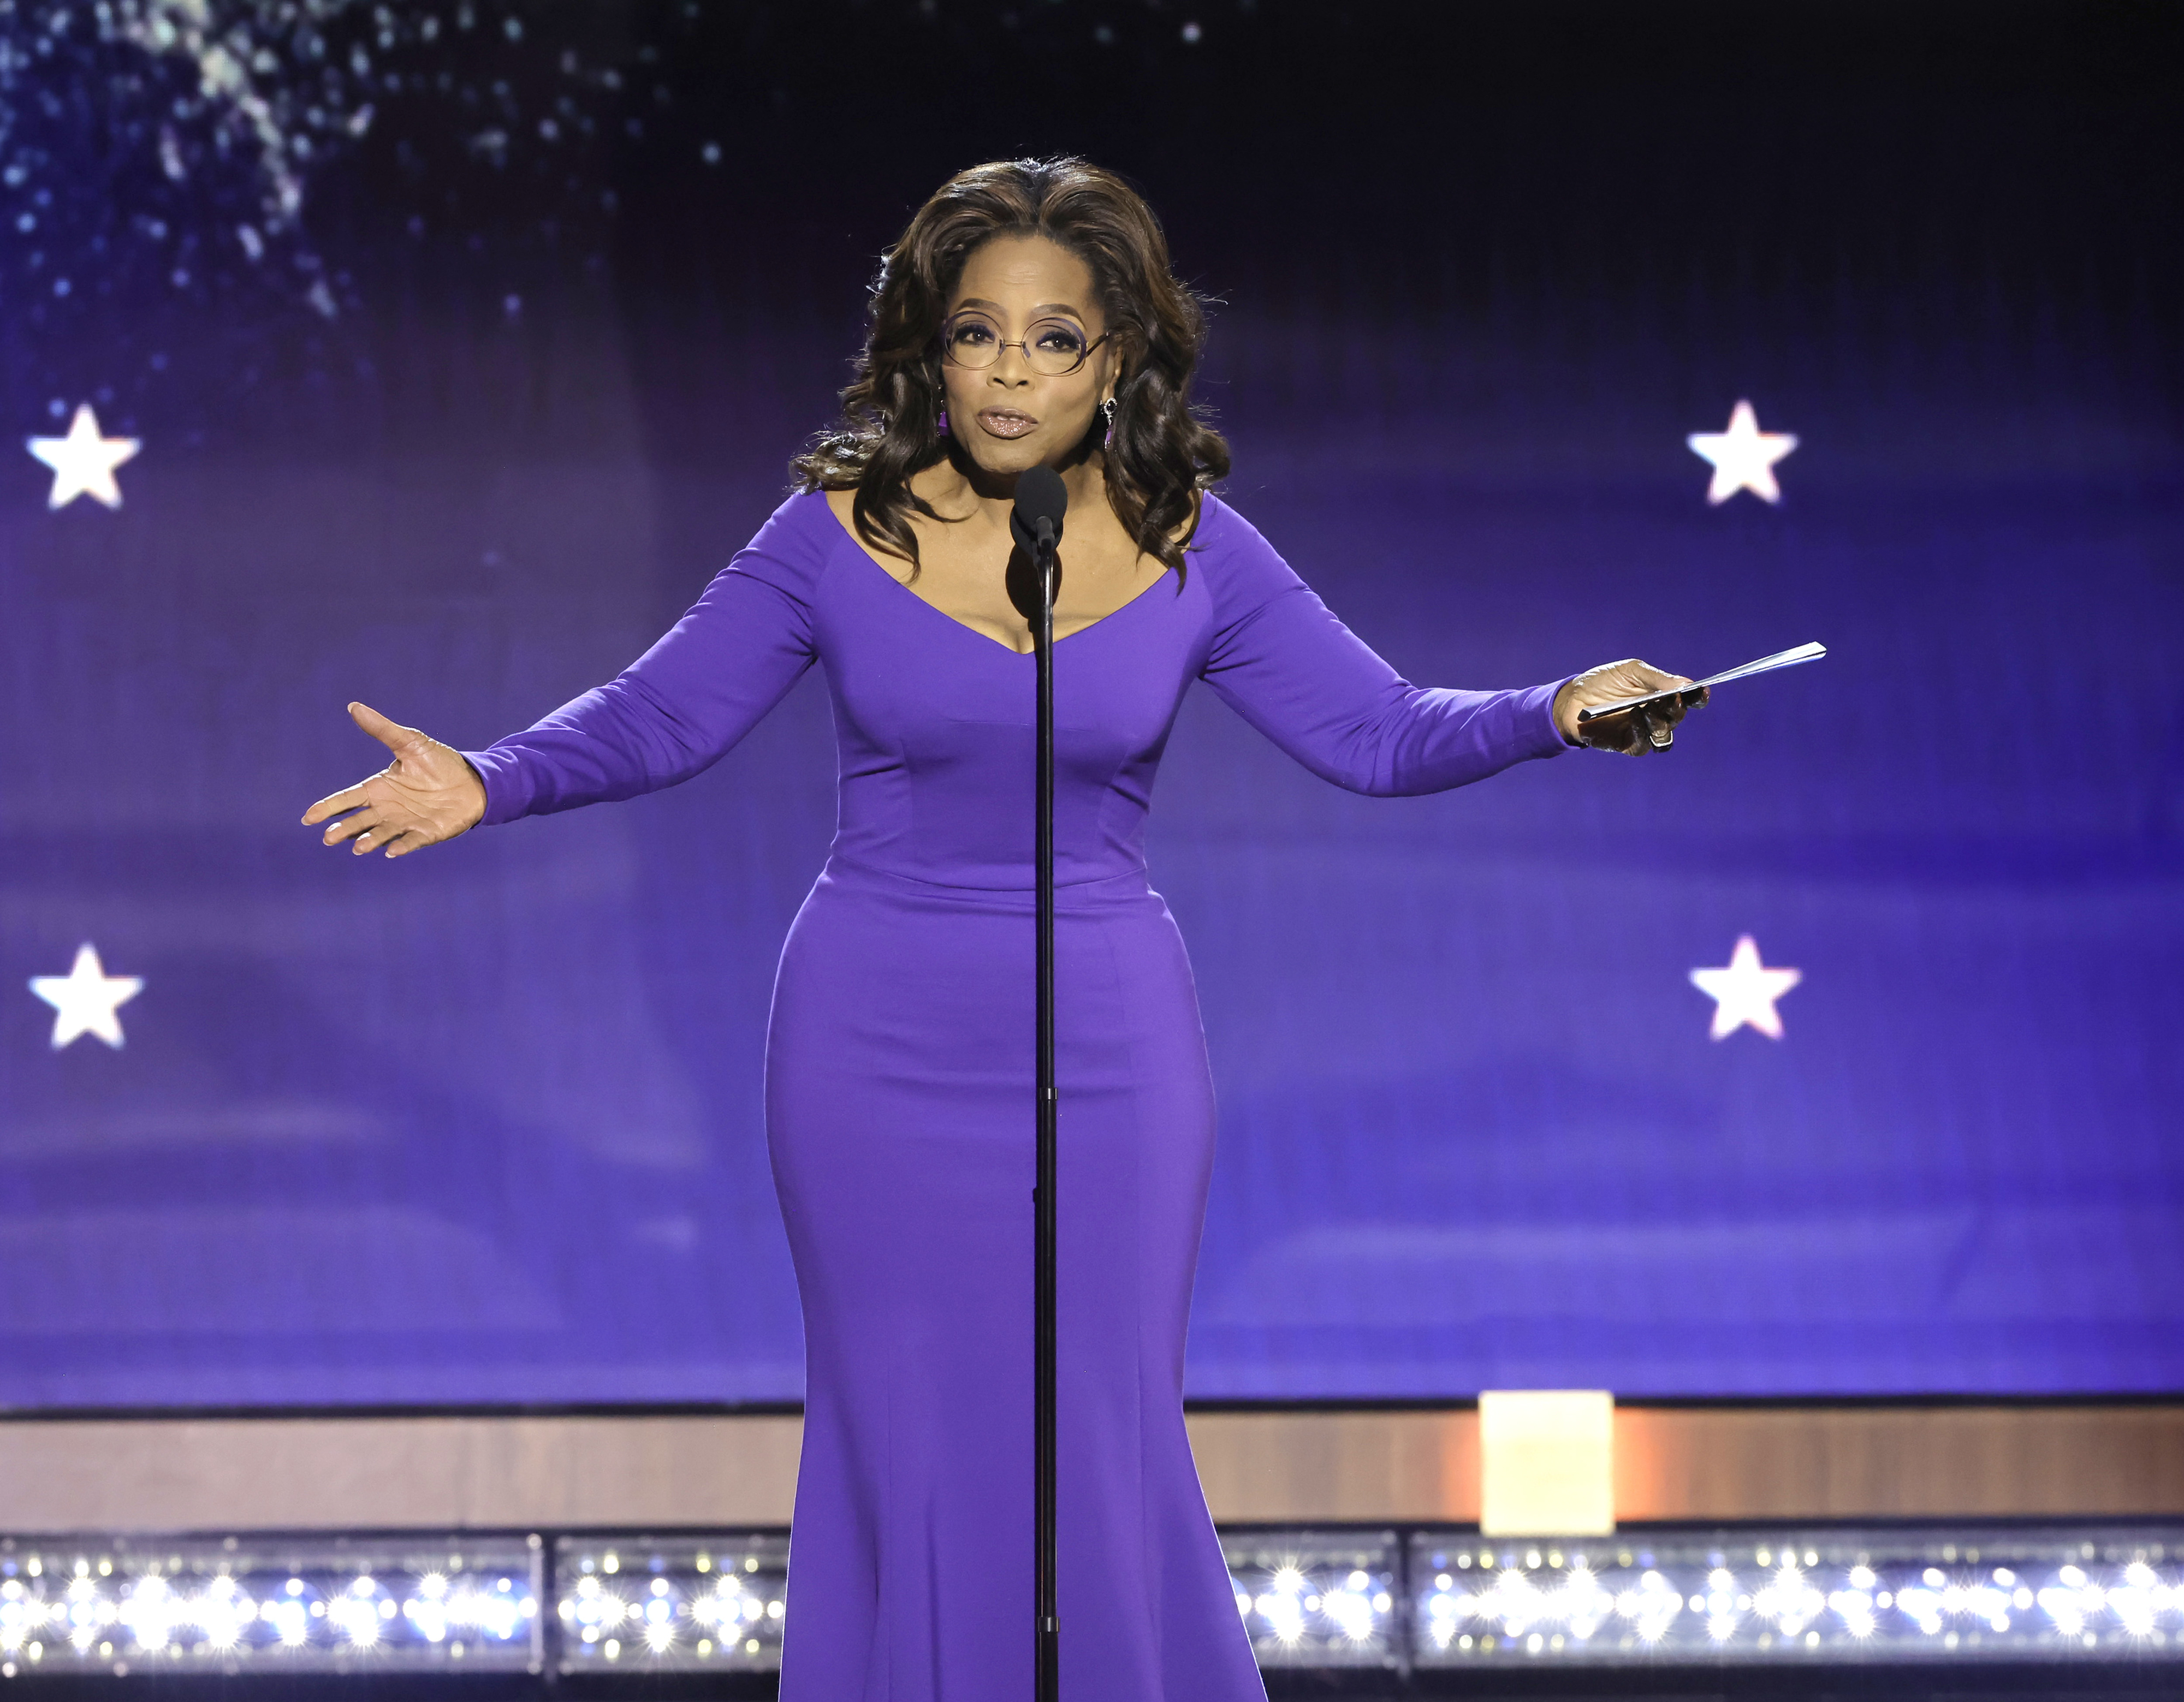 Oprah Winfrey in a long-sleeved dress, speaking at a podium onstage with stars in the background